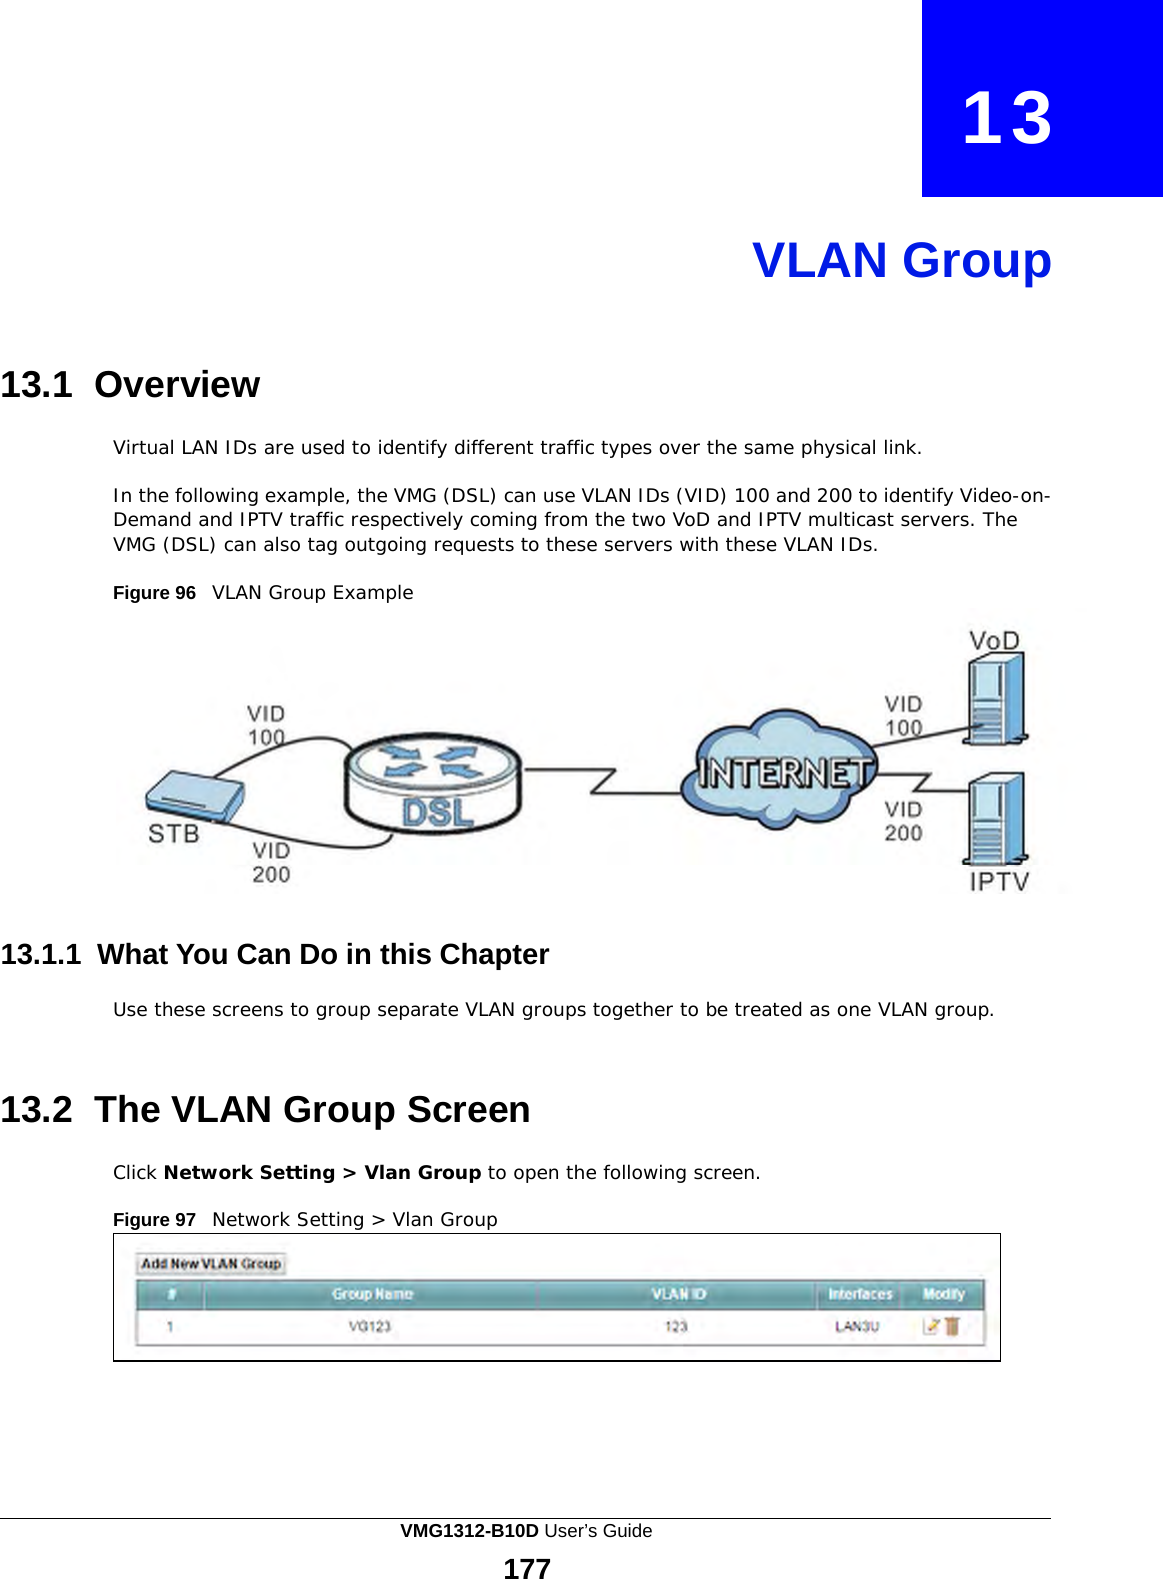    13     VLAN Group     13.1 Overview  Virtual LAN IDs are used to identify different traffic types over the same physical link.  In the following example, the VMG (DSL) can use VLAN IDs (VID) 100 and 200 to identify Video-on- Demand and IPTV traffic respectively coming from the two VoD and IPTV multicast servers. The VMG (DSL) can also tag outgoing requests to these servers with these VLAN IDs.  Figure 96   VLAN Group Example    13.1.1 What You Can Do in this Chapter  Use these screens to group separate VLAN groups together to be treated as one VLAN group.    13.2 The VLAN Group Screen  Click Network Setting &gt; Vlan Group to open the following screen.  Figure 97   Network Setting &gt; Vlan Group VMG1312-B10D User’s Guide 177  